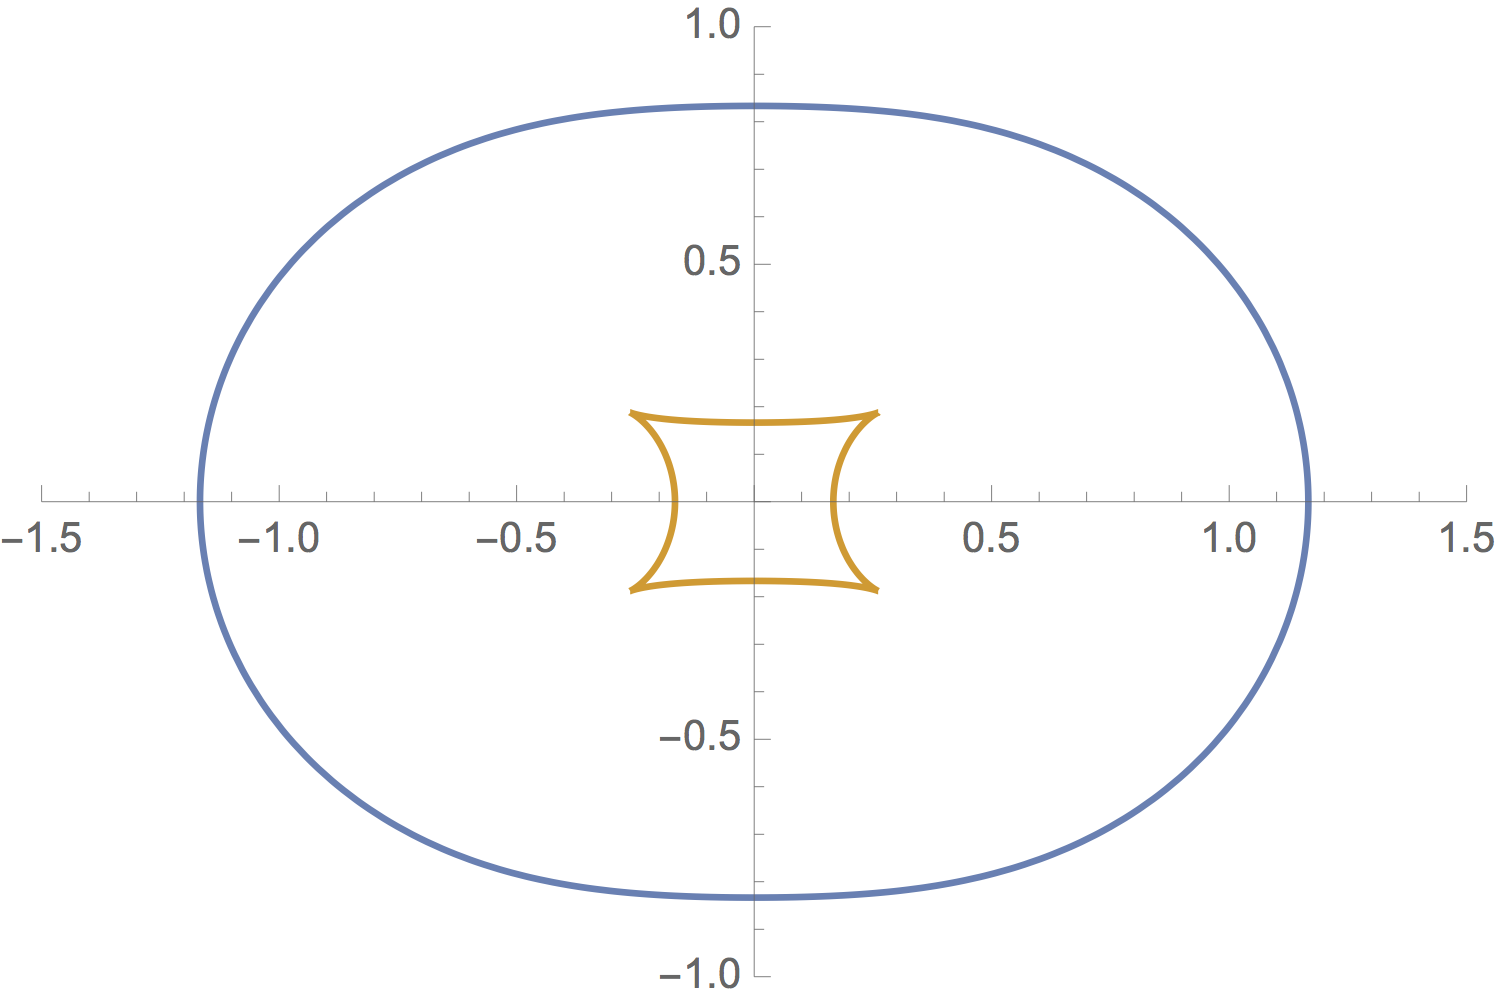 Parallel curves with unusual arclengths! The outer curve has arclength approximately $6.455$, while the inner curve (at unit distance $d=1$) has arclength $\approx 1.929$. The difference is $4.526$, which is not a multiple of  $2 \pi$. Note that these curves are traversed in opposite rotational directions: the runner on the outer path goes counterclockwise, and the runner on the inner path goes clockwise. The horizontal parts of the paths are in "ribbon formation" and the vertical parts are in "bowtie formation".